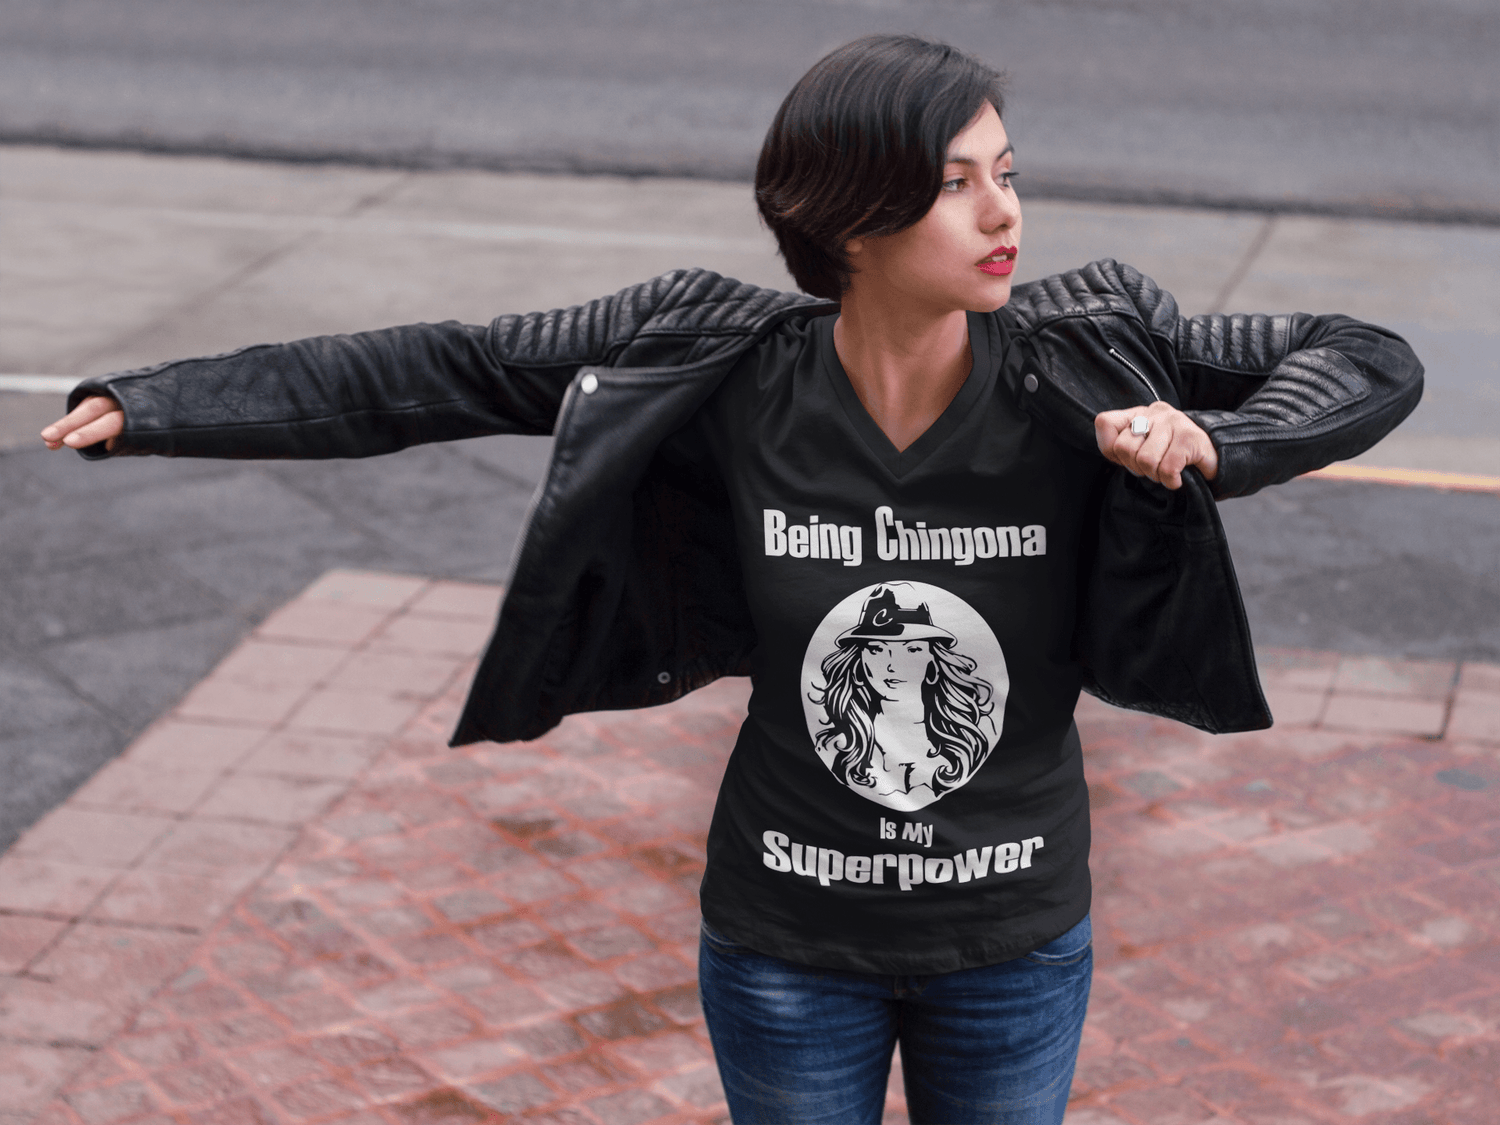 Ladies Black V-neck t-shirt with white lettering of "Being Chingona Is My Superpower" 